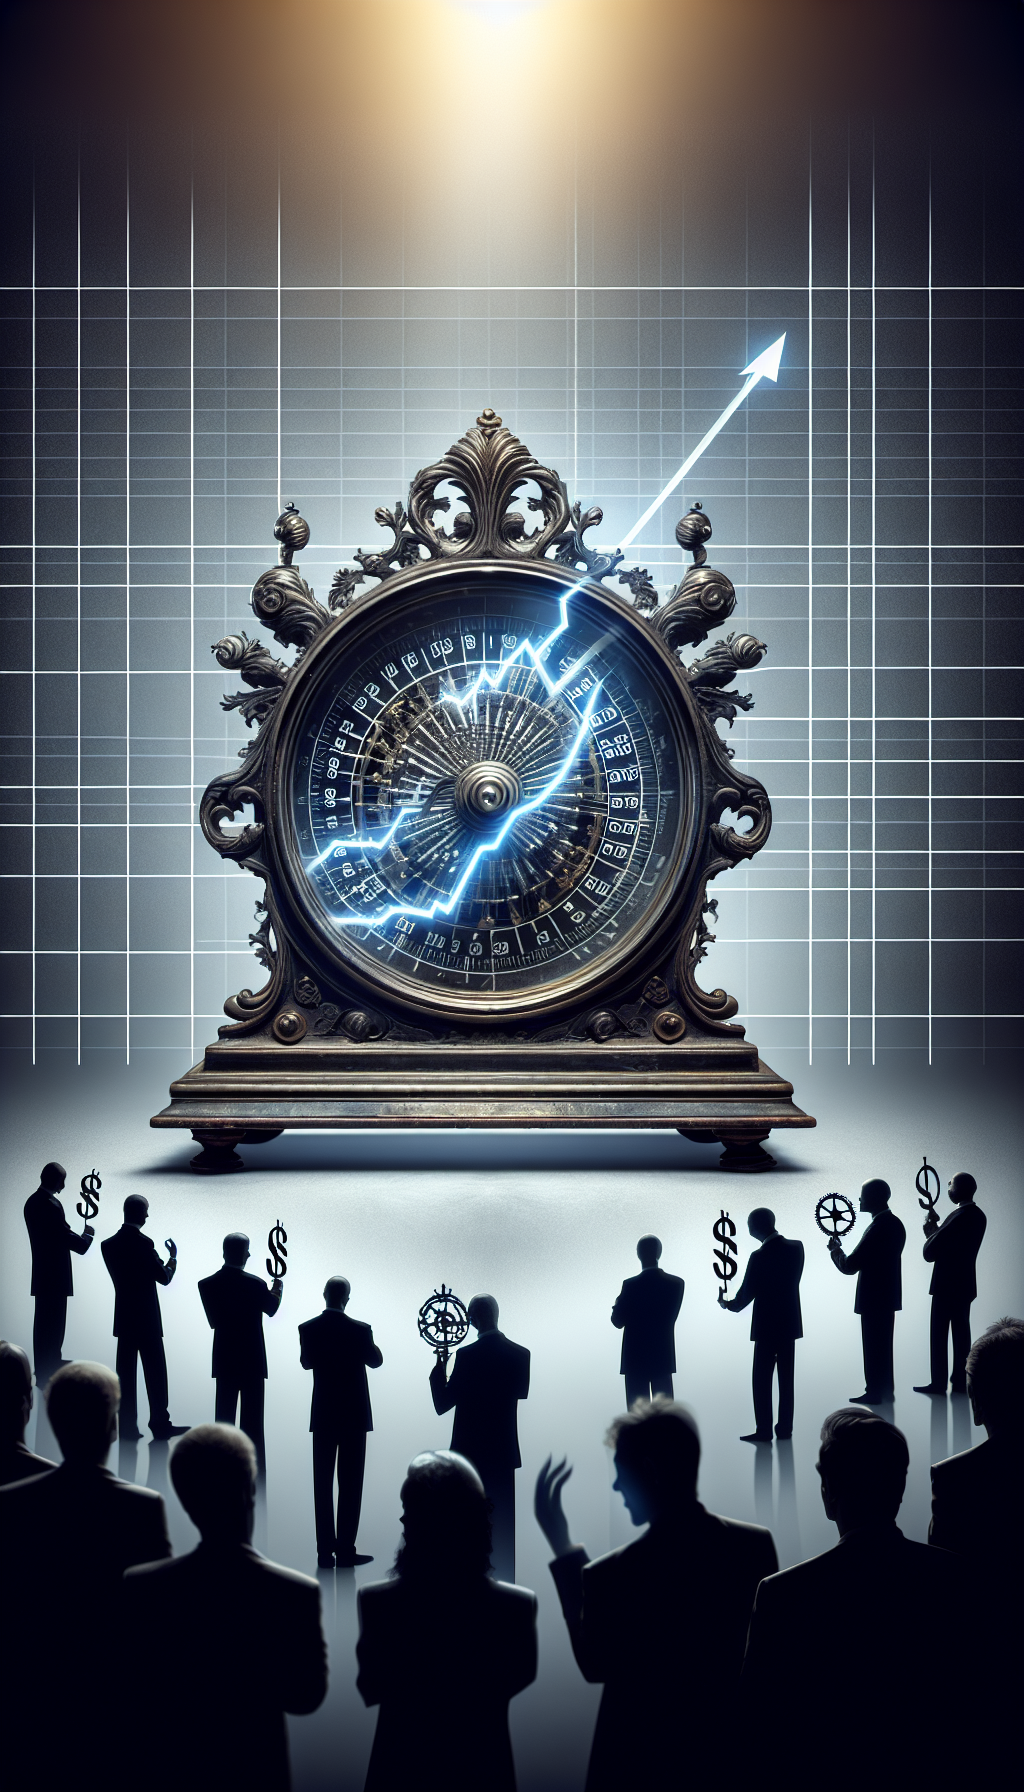 An image of an elegant, ornate antique mantel clock, its hands spiraling into a graph that shows ascending market trends, symbolizing rising value. The clock is juxtaposed against a backdrop of ghosted images of rarer clocks, illustrating scarcity and demand. Collectors' silhouettes, with visible dollar signs in their eyes, are bidding fervently at an auction under the clock.